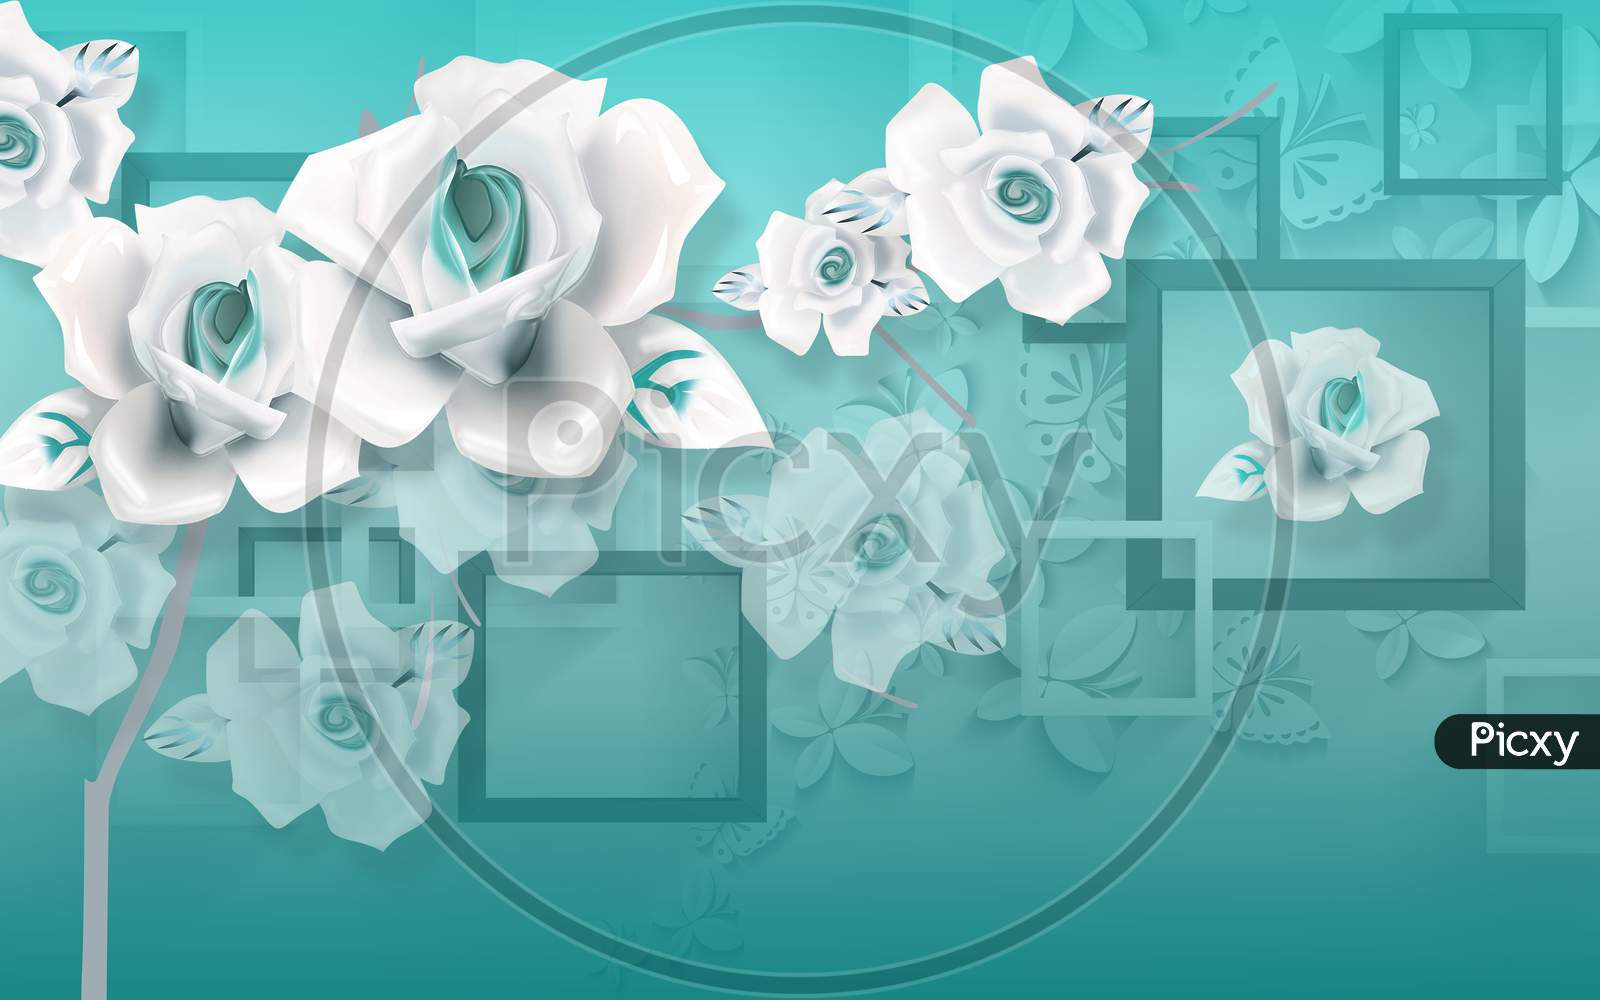 Image Of 3d Wallpaper With Whitest Flower And Aqua Color Beautyful Background Iy5125 Picxy